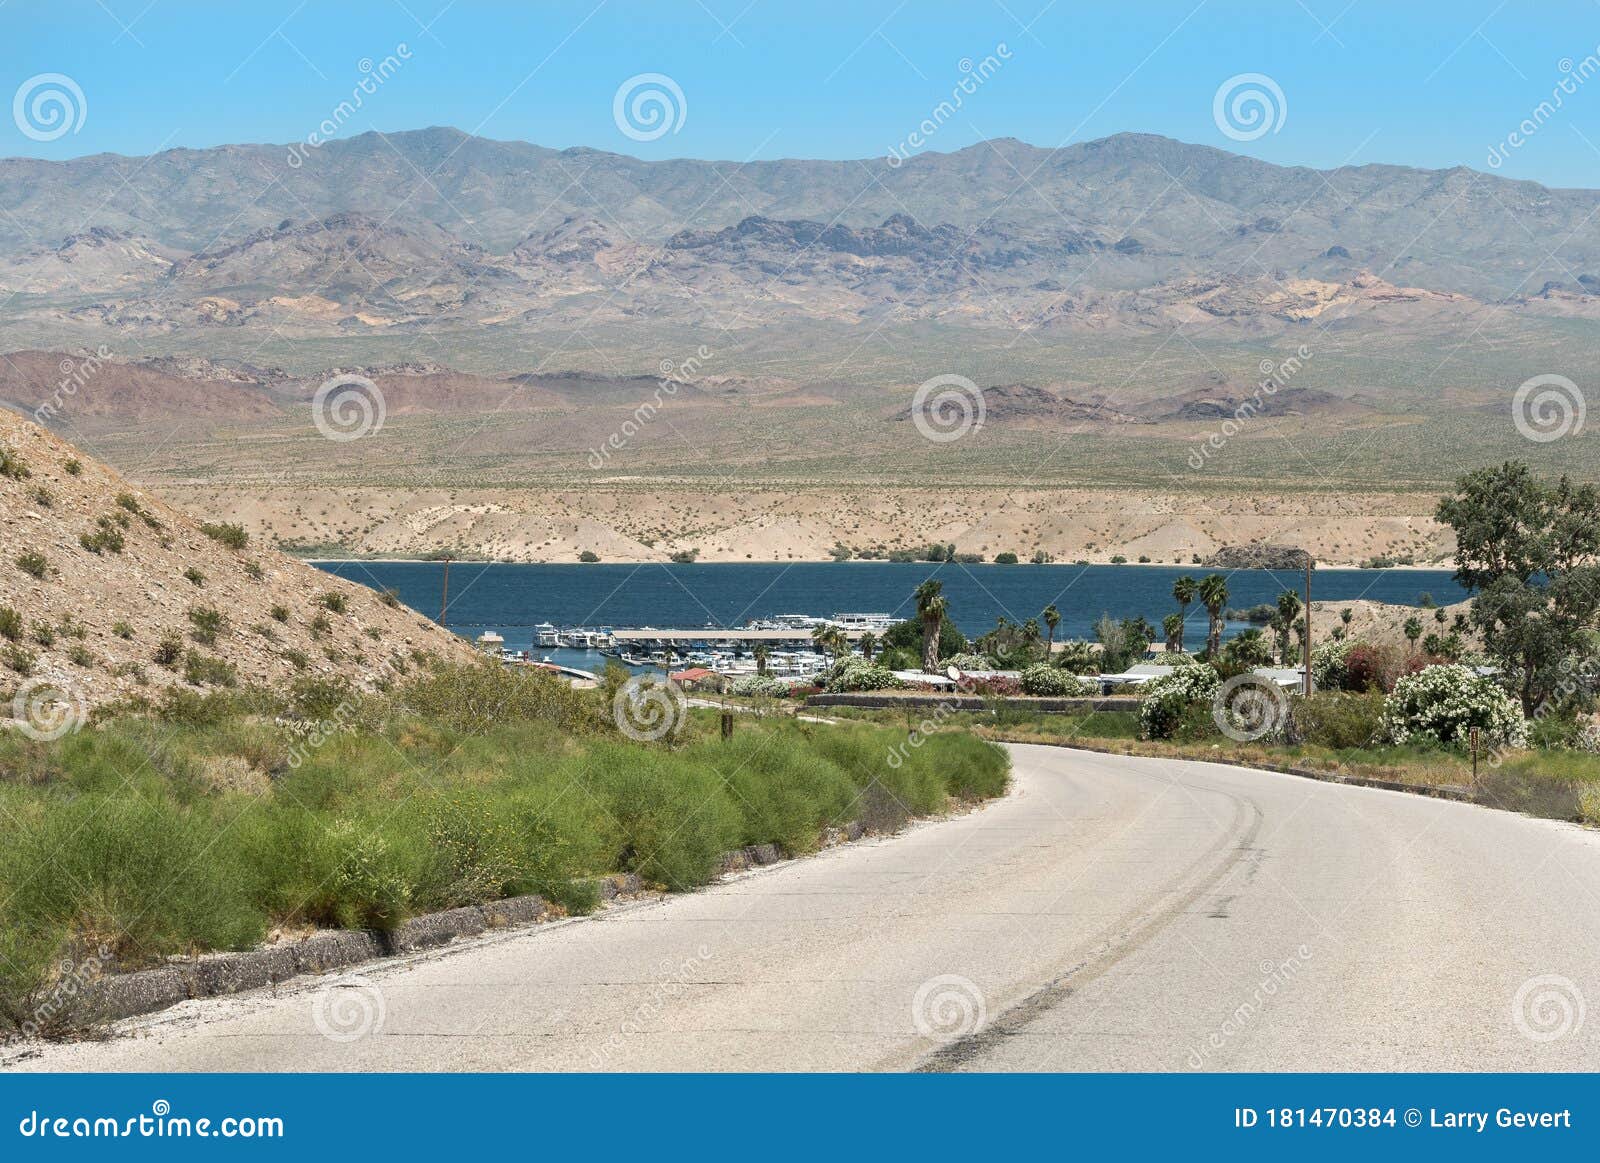 the road to cottonwood cove on lake mohave